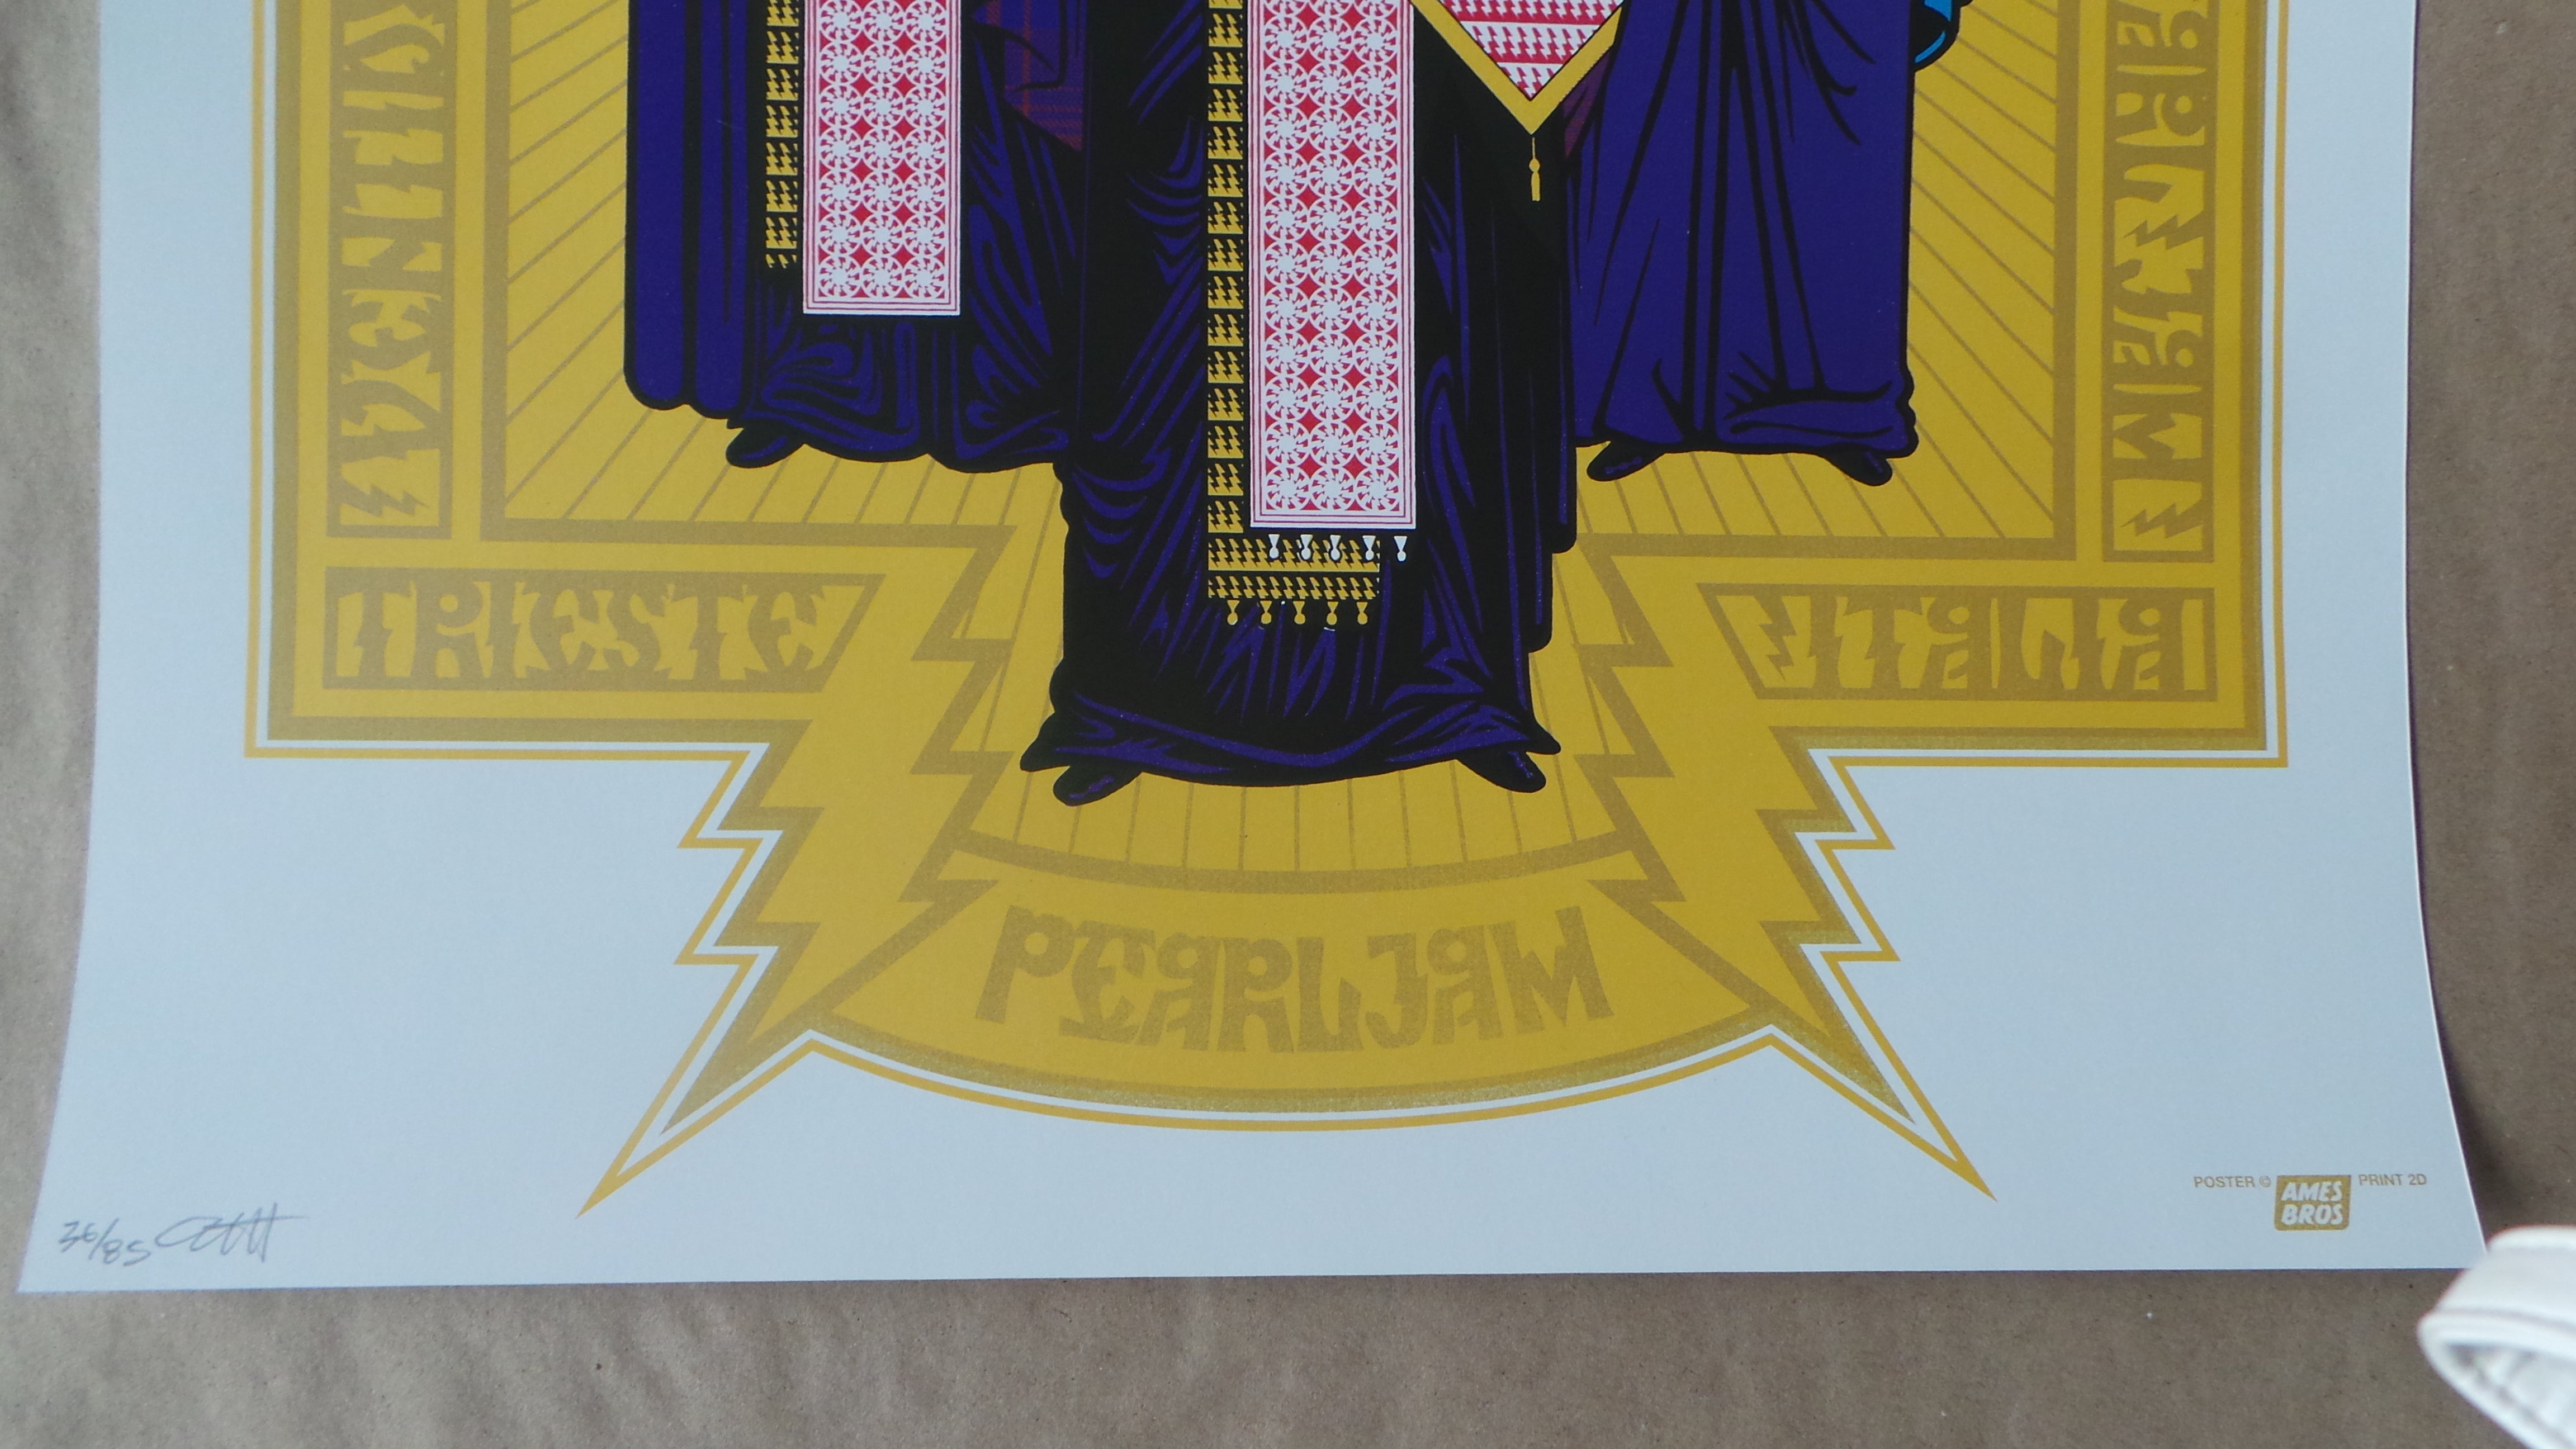 Title: PEARL JAM - 2014 AMES BROTHERS POSTER TRIESTE ITALY METALLIC S/N’d xx/85 Poster artist: Ames Brothers Edition: xx/85 Type: Screen Print Size: 20" x 26" Location: Trieste, Italy Venue: Notes: PEARL JAM - 2014 Lightning Bolt Tour, Europe.